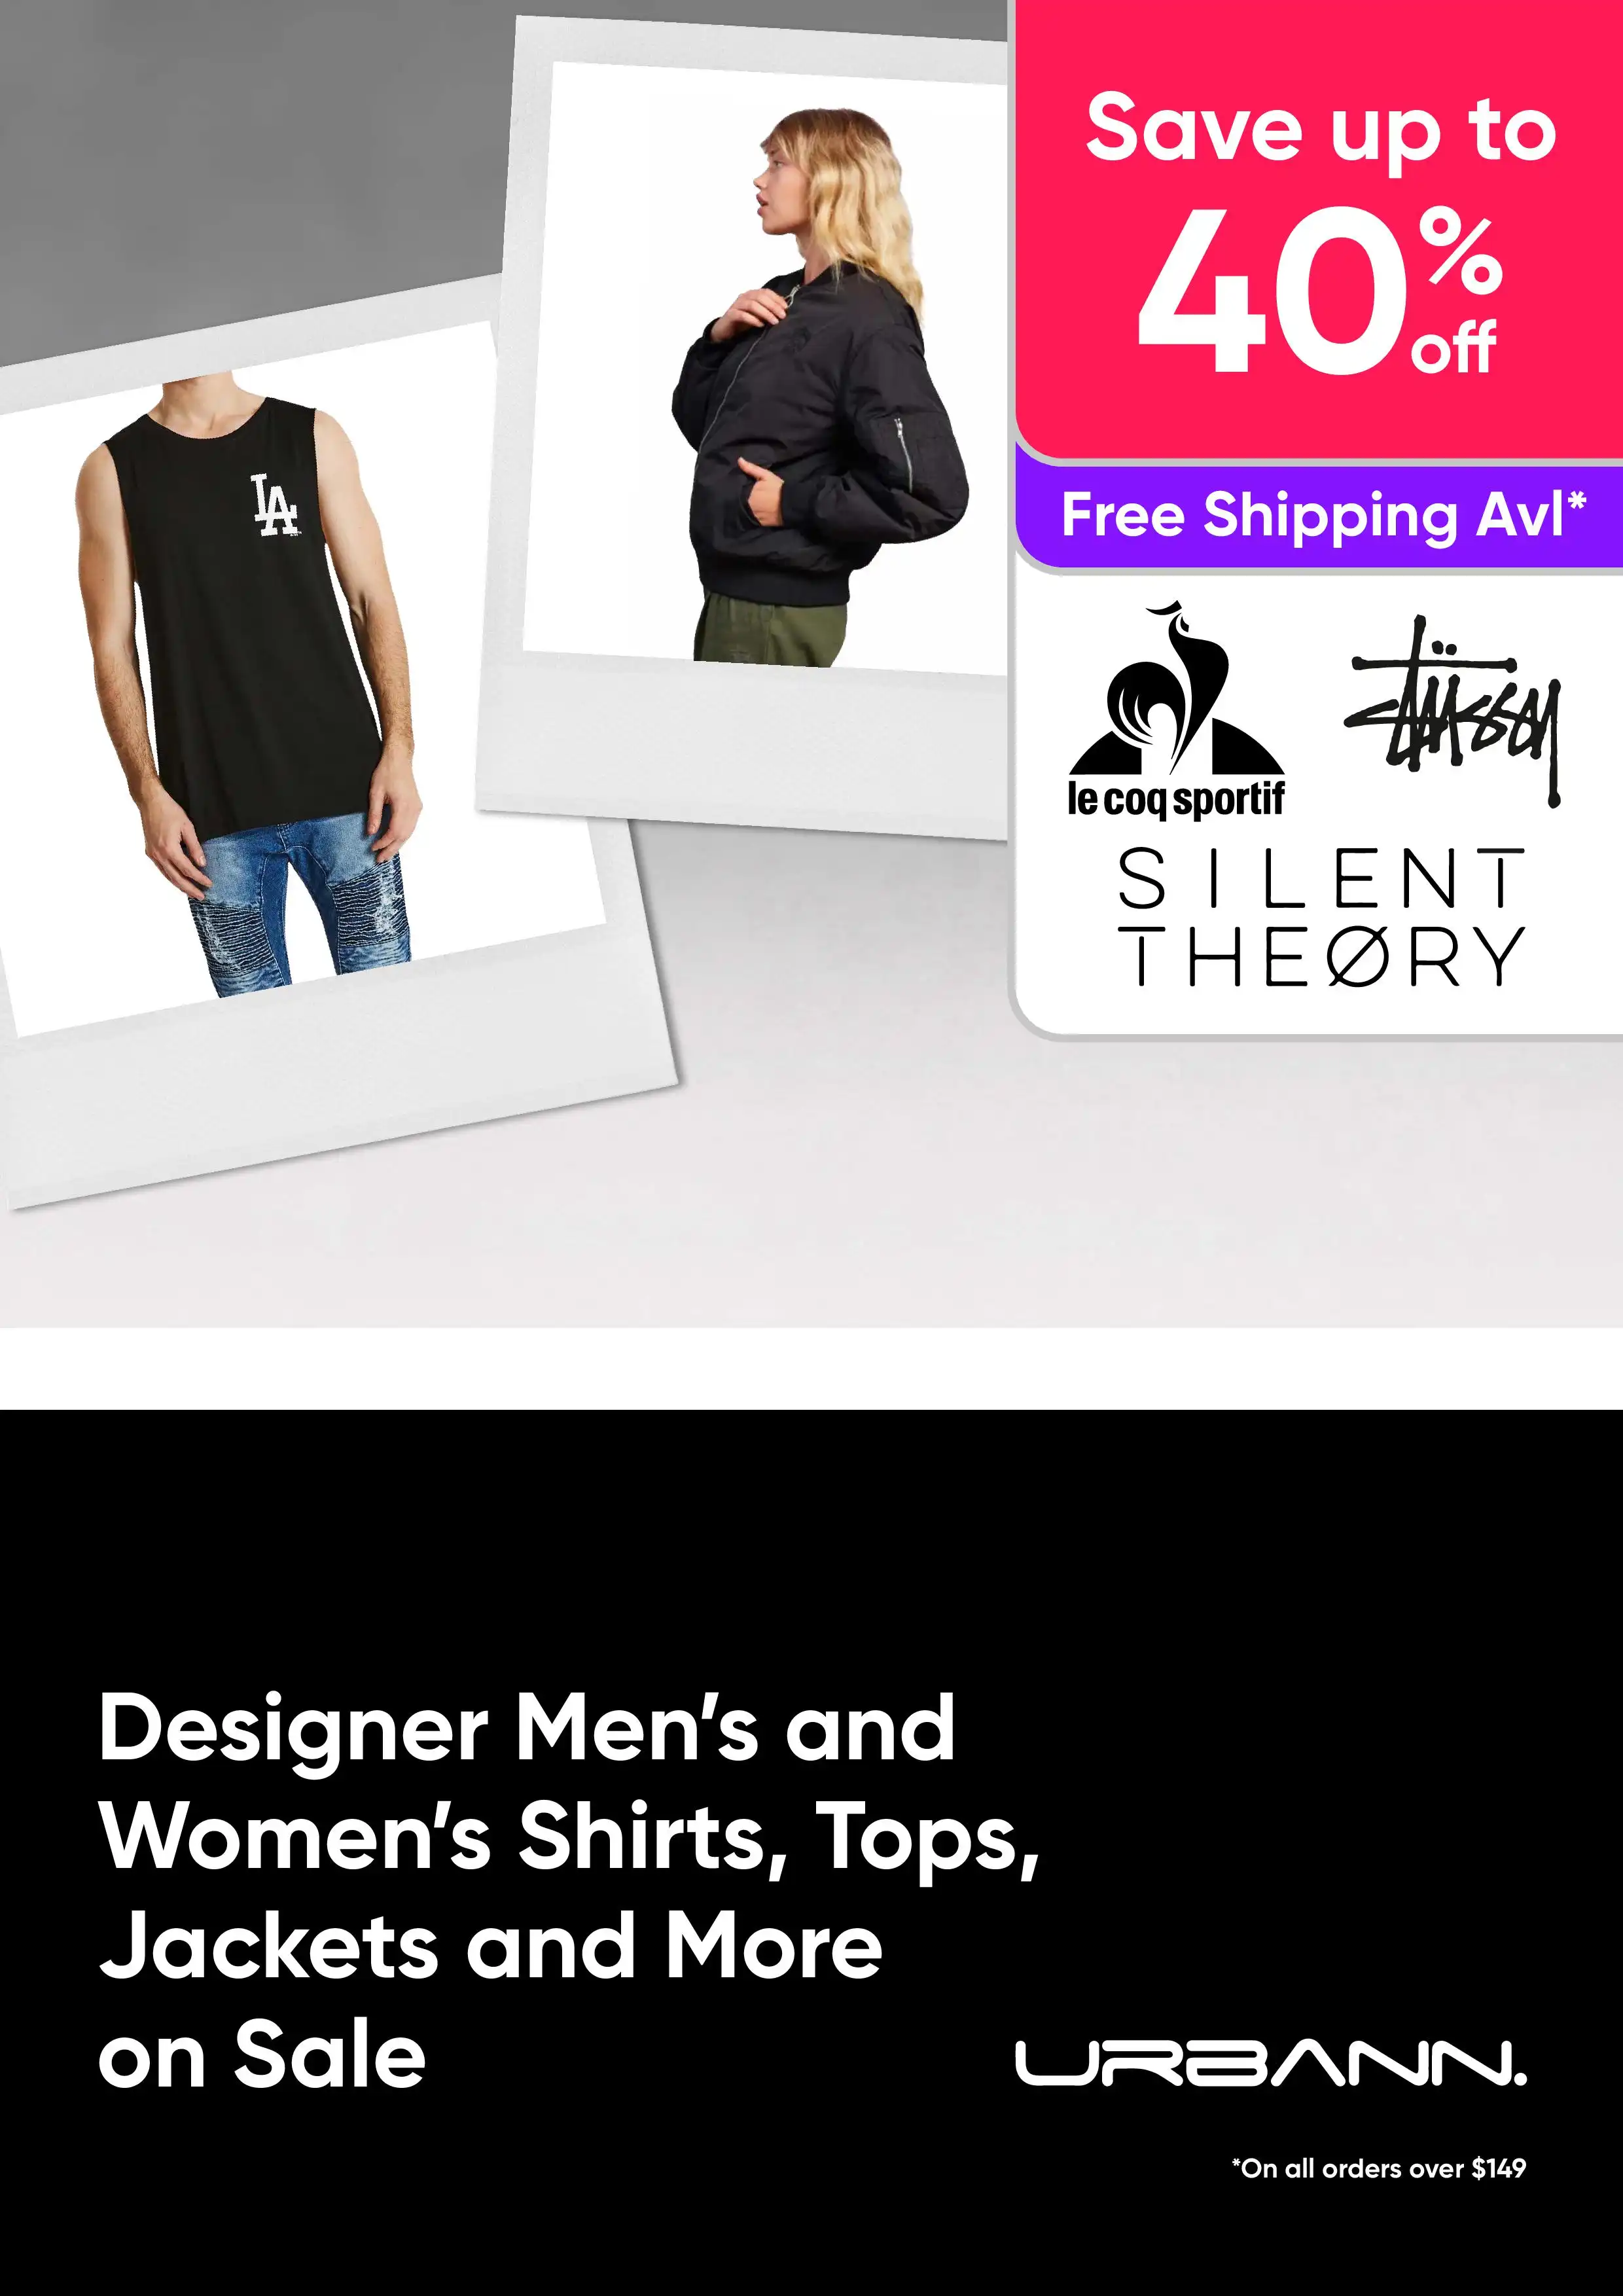 Designer Mens and Womens Shirts, Tops, Jackets And More on Sale - Save Up to 40% Off RRP